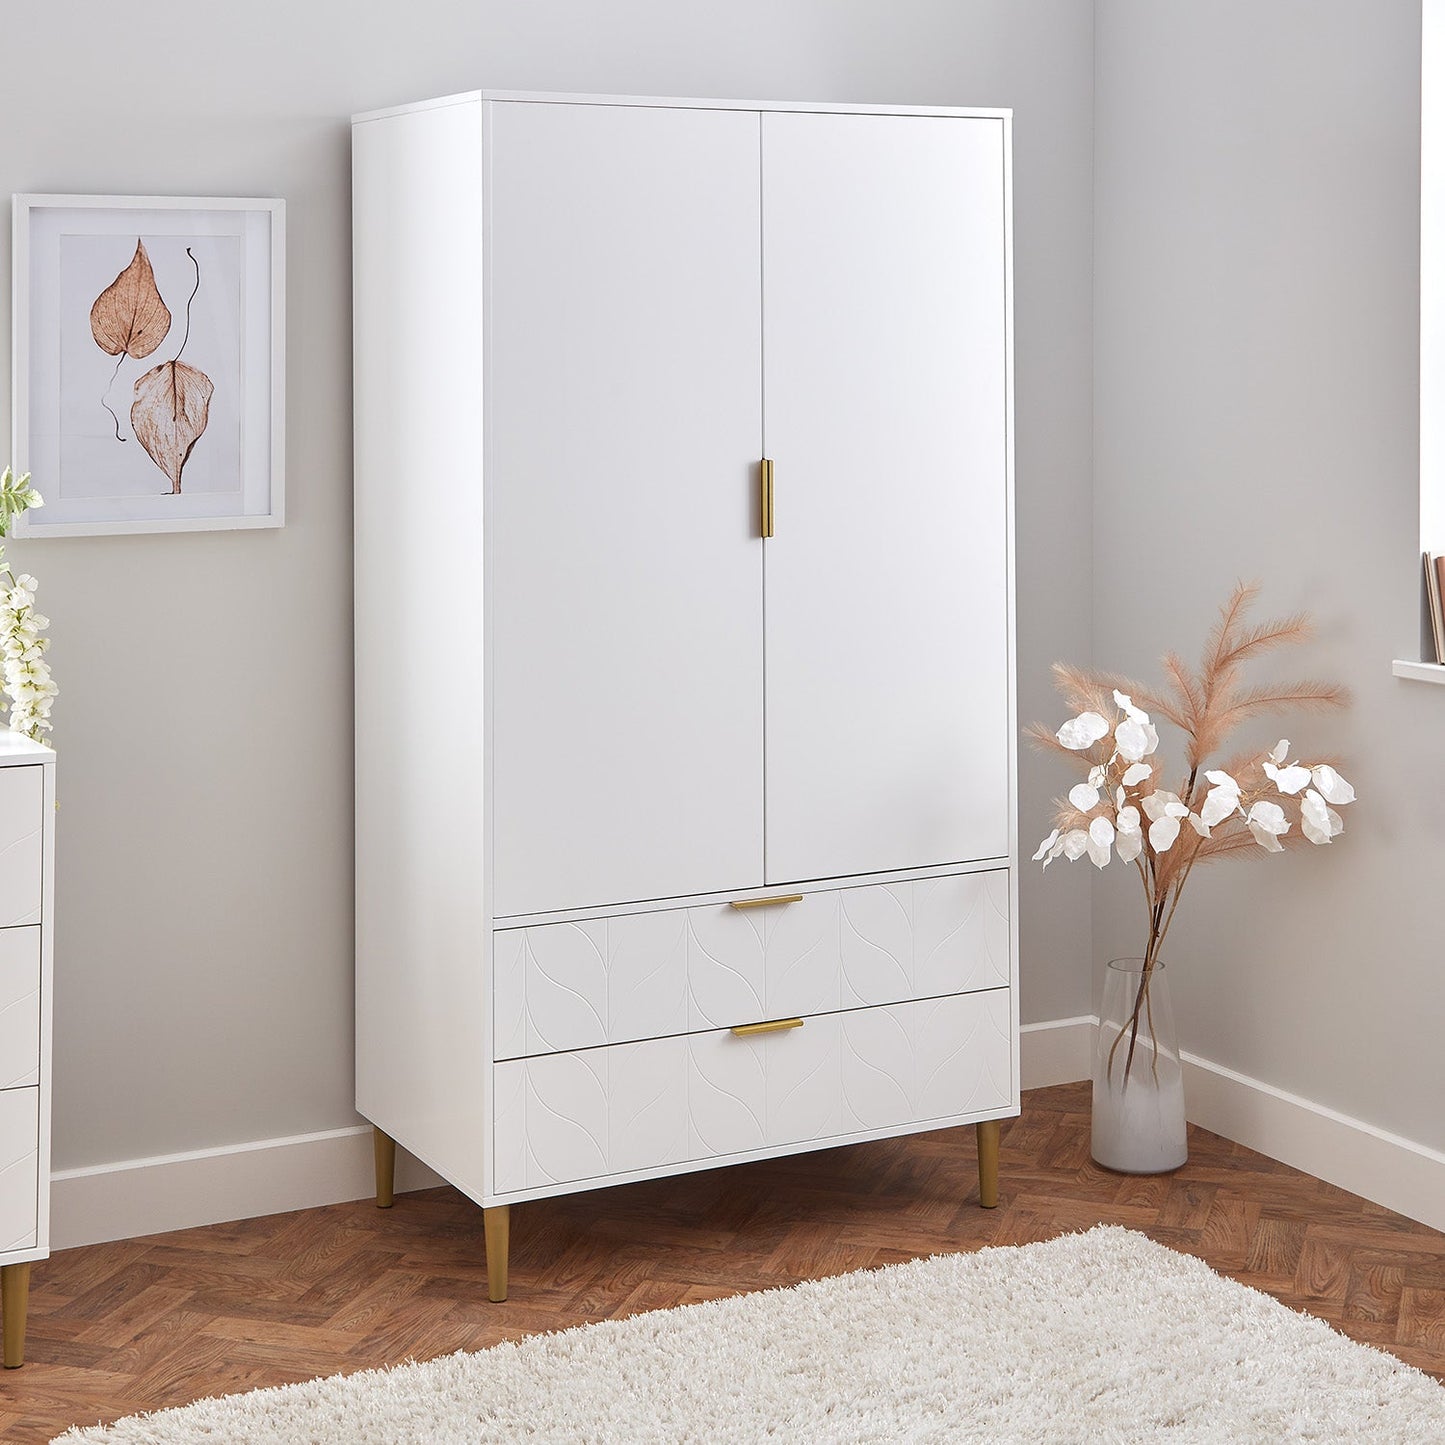 Gloria 4 piece bedroom furniture set - 3 drawer chest of drawers - white - Laura James